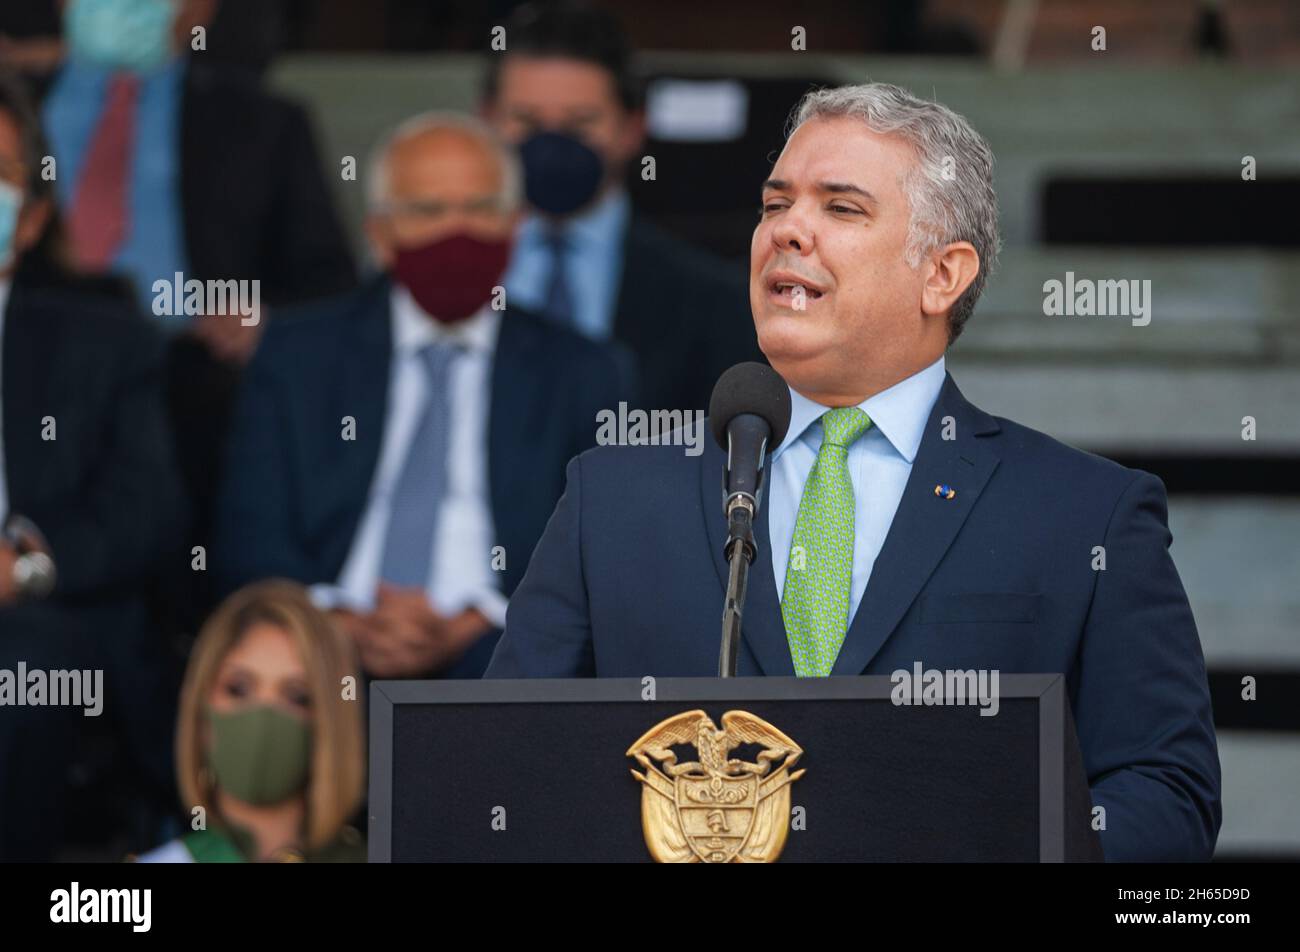 Colombia's president, Ivan Duque Marquez gives a speech during an event were Colombia's president Ivan Duque Marquez and Colombia's Minister of Defens Stock Photo